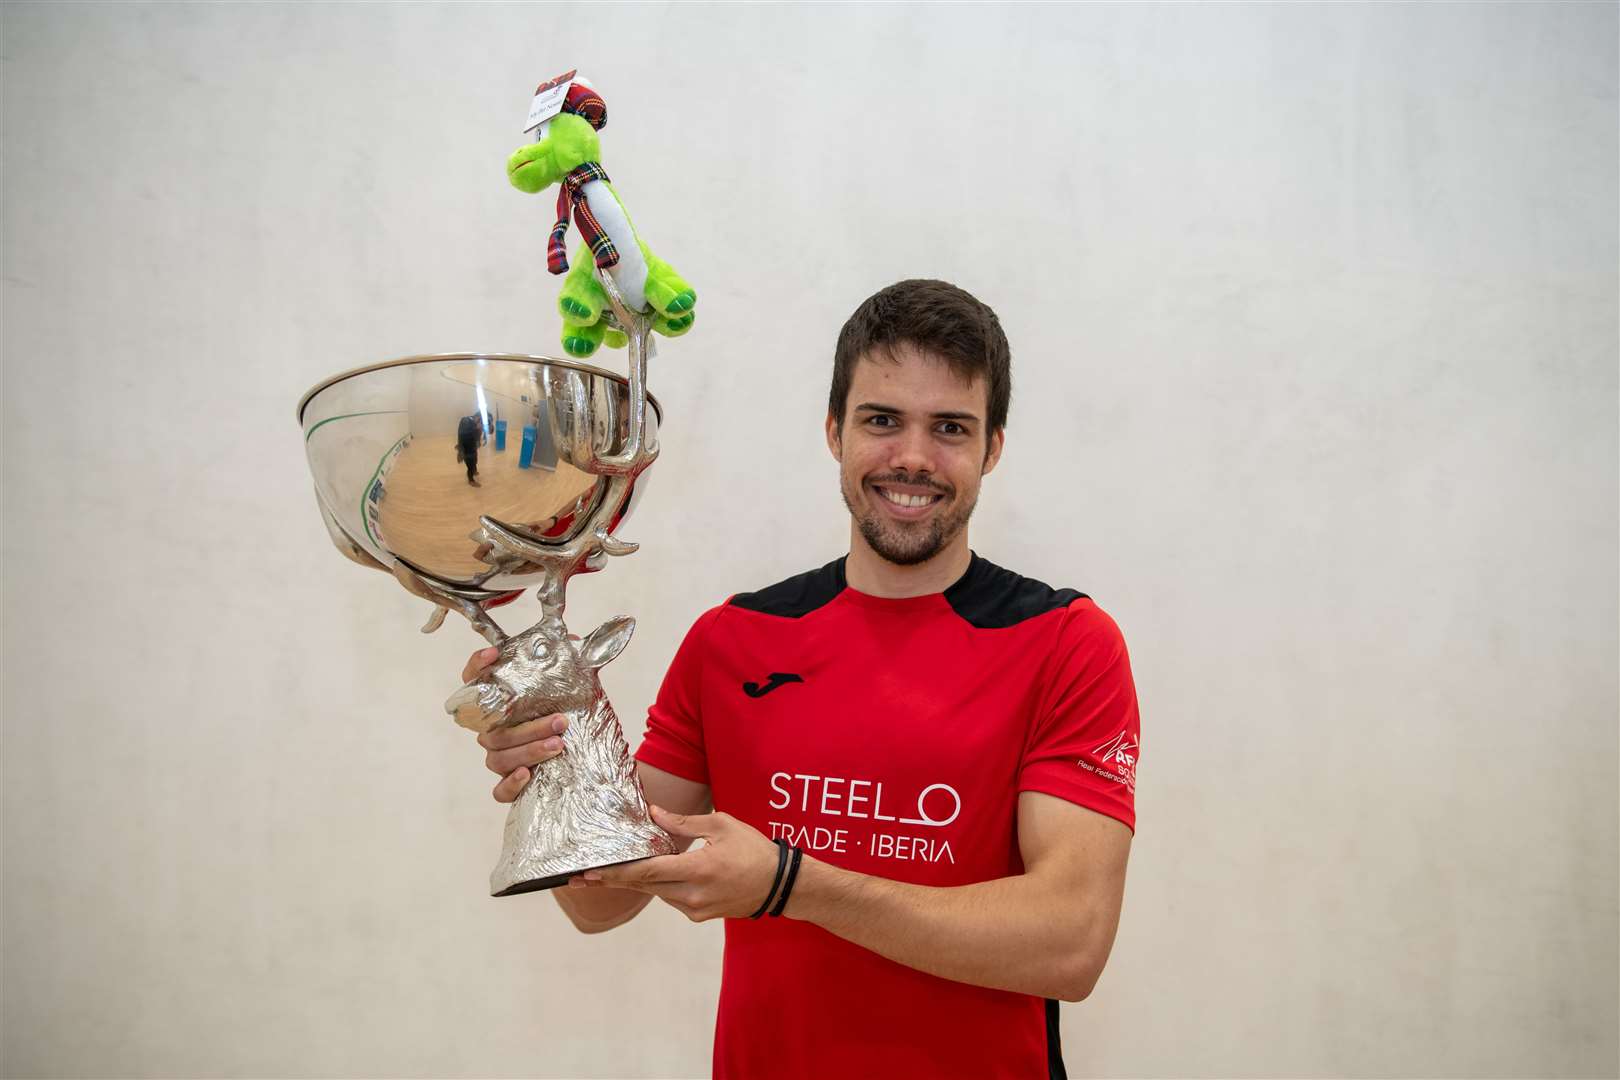 Edmon Lopez from Spain won the Scottish Squash Open in Inverness.